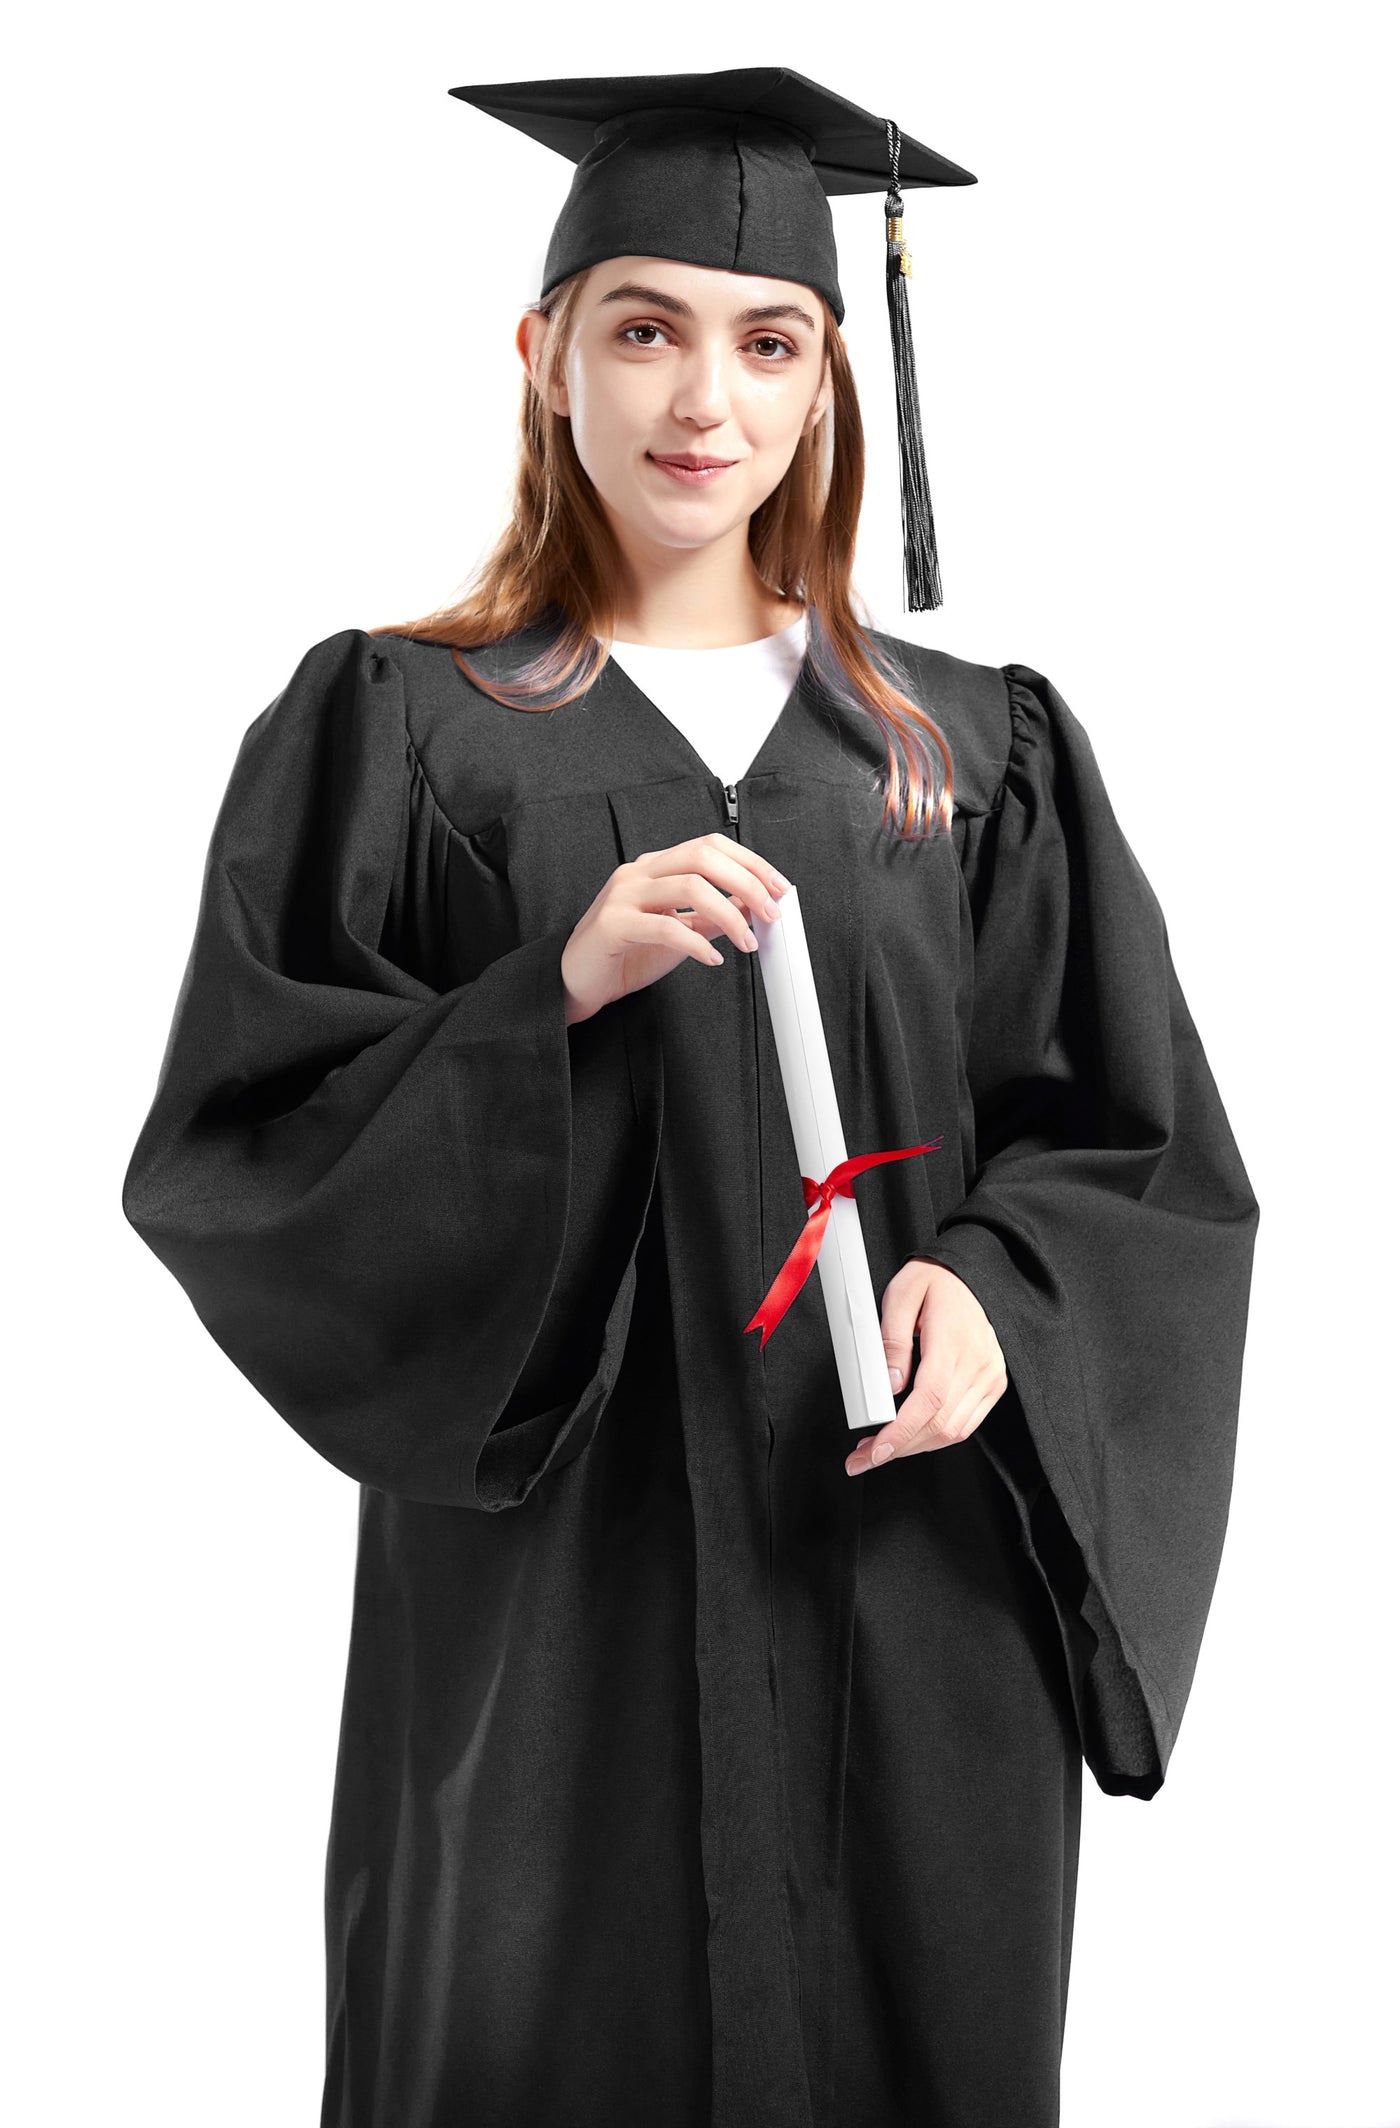 Graduate School Commencement: The History and Meaning of the Cap and Gown |  Walden University